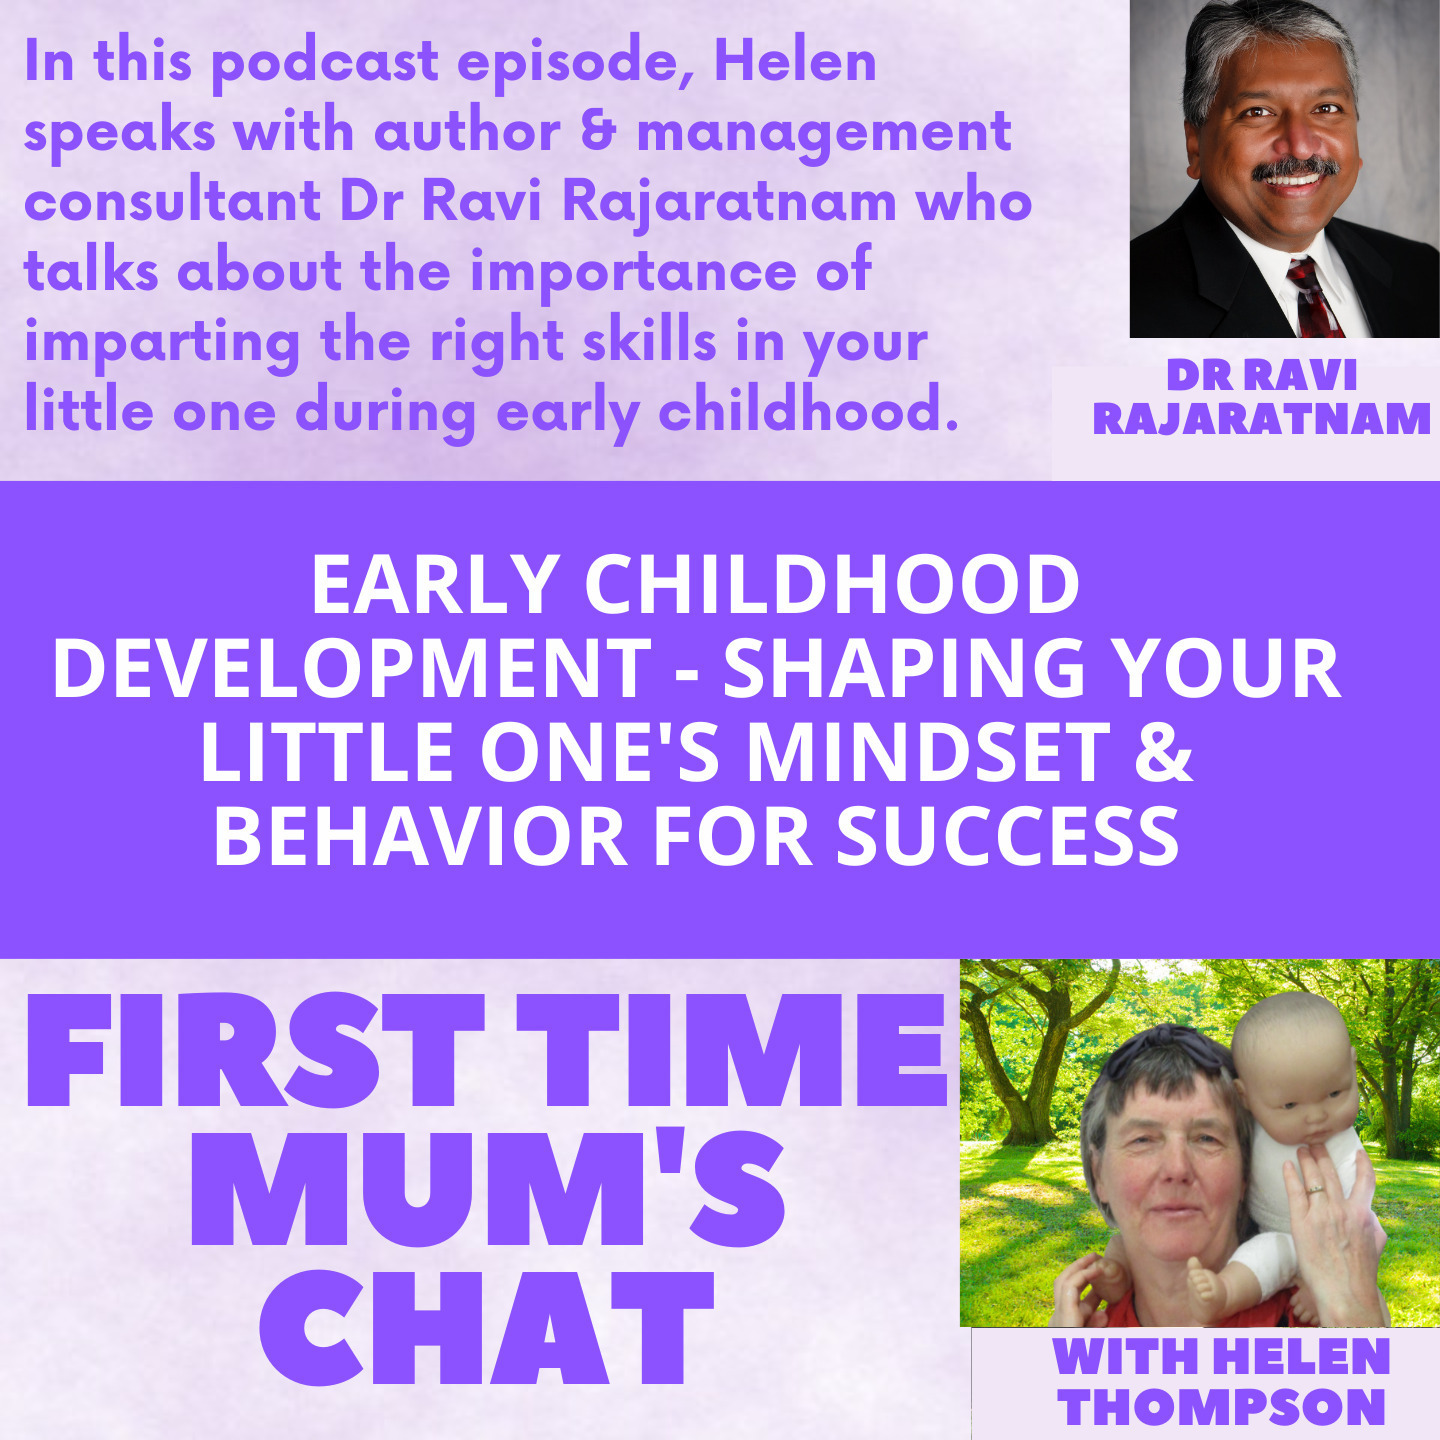 Early Childhood Development - Shaping Your Little One’s Mindset & Behavior For Success